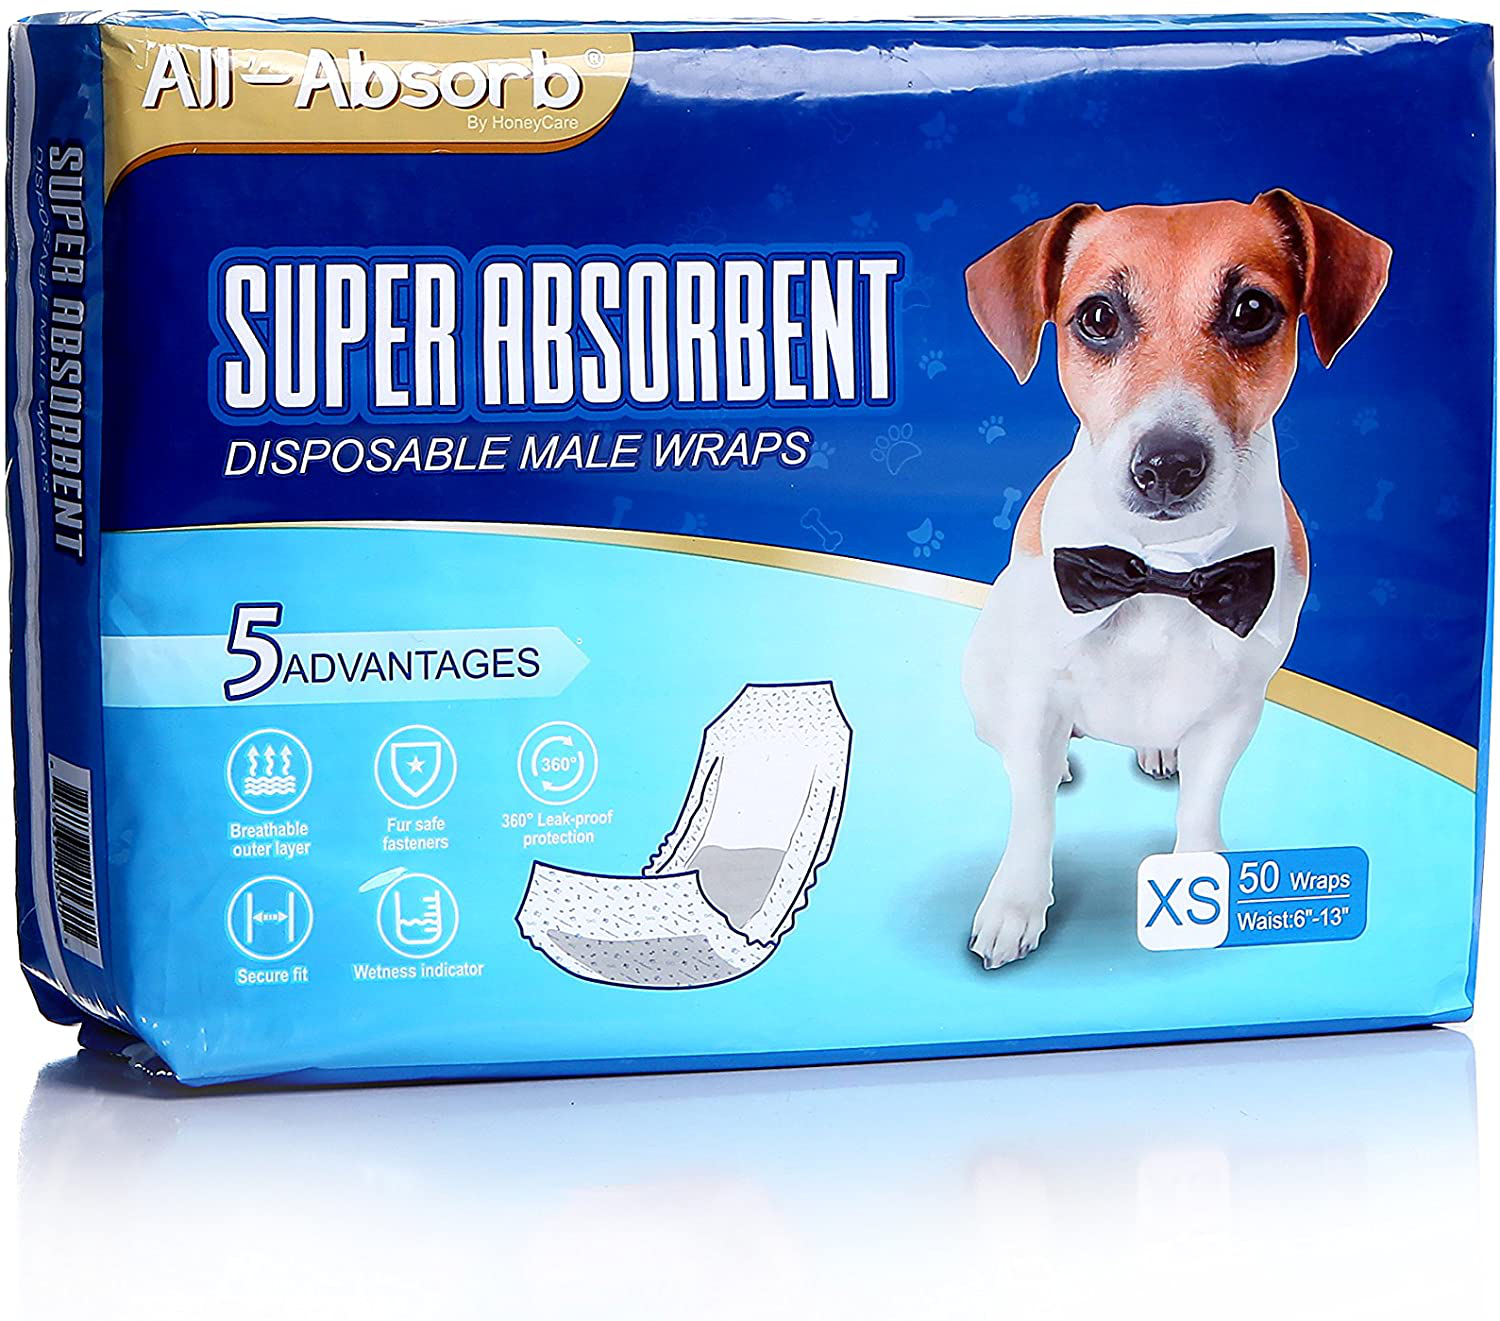 All-Absorb A27 Male Dog Wrap, 50 Count, X-Small Animals & Pet Supplies > Pet Supplies > Dog Supplies > Dog Diaper Pads & Liners All-Absorb   